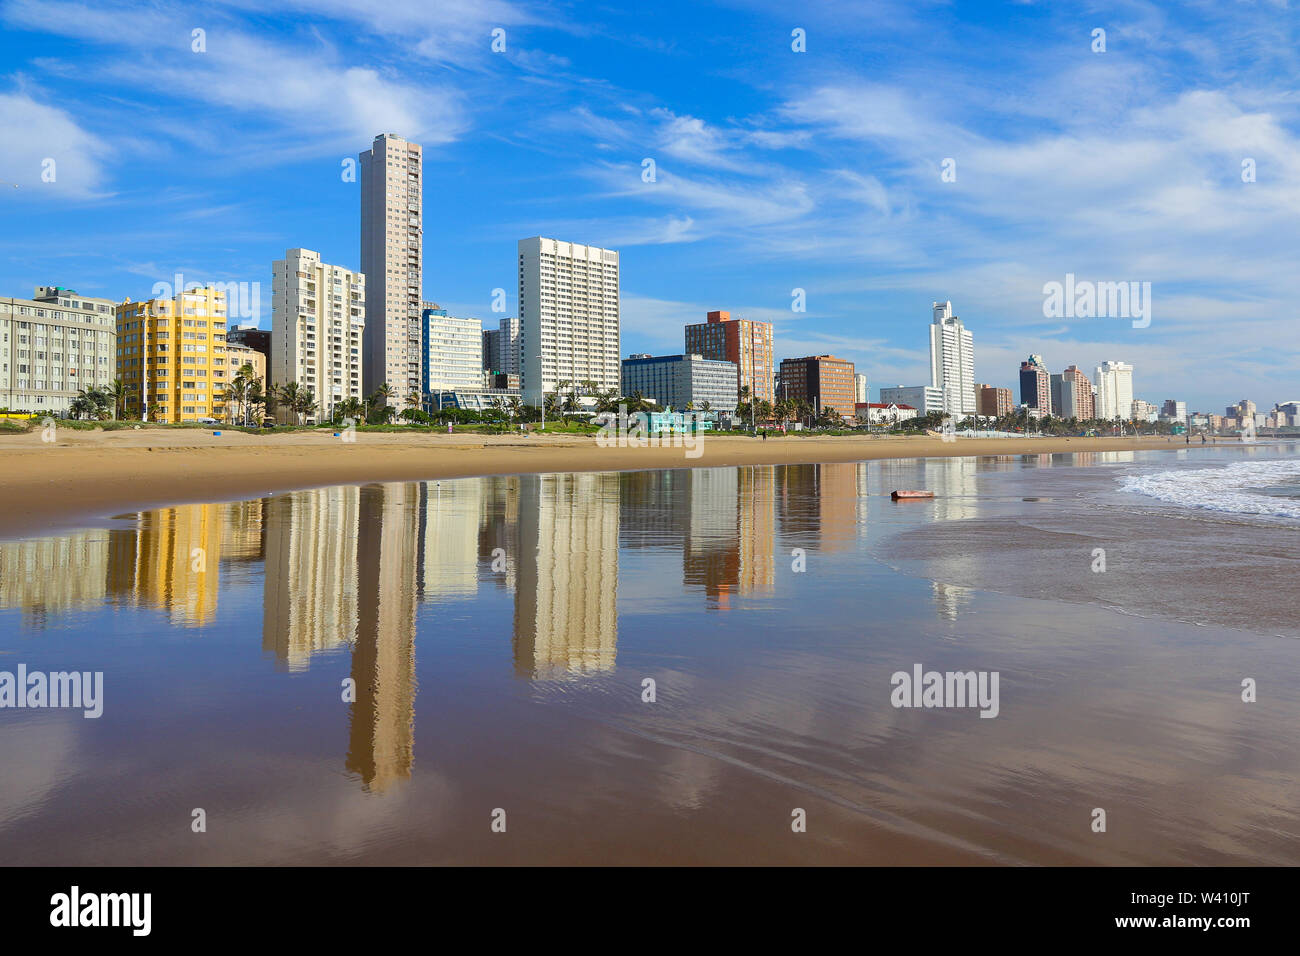 Reflection of Durban 'Golden Mile' beachfront in the Indian Ocean, KwaZulu-Natal province of South Africa Stock Photo